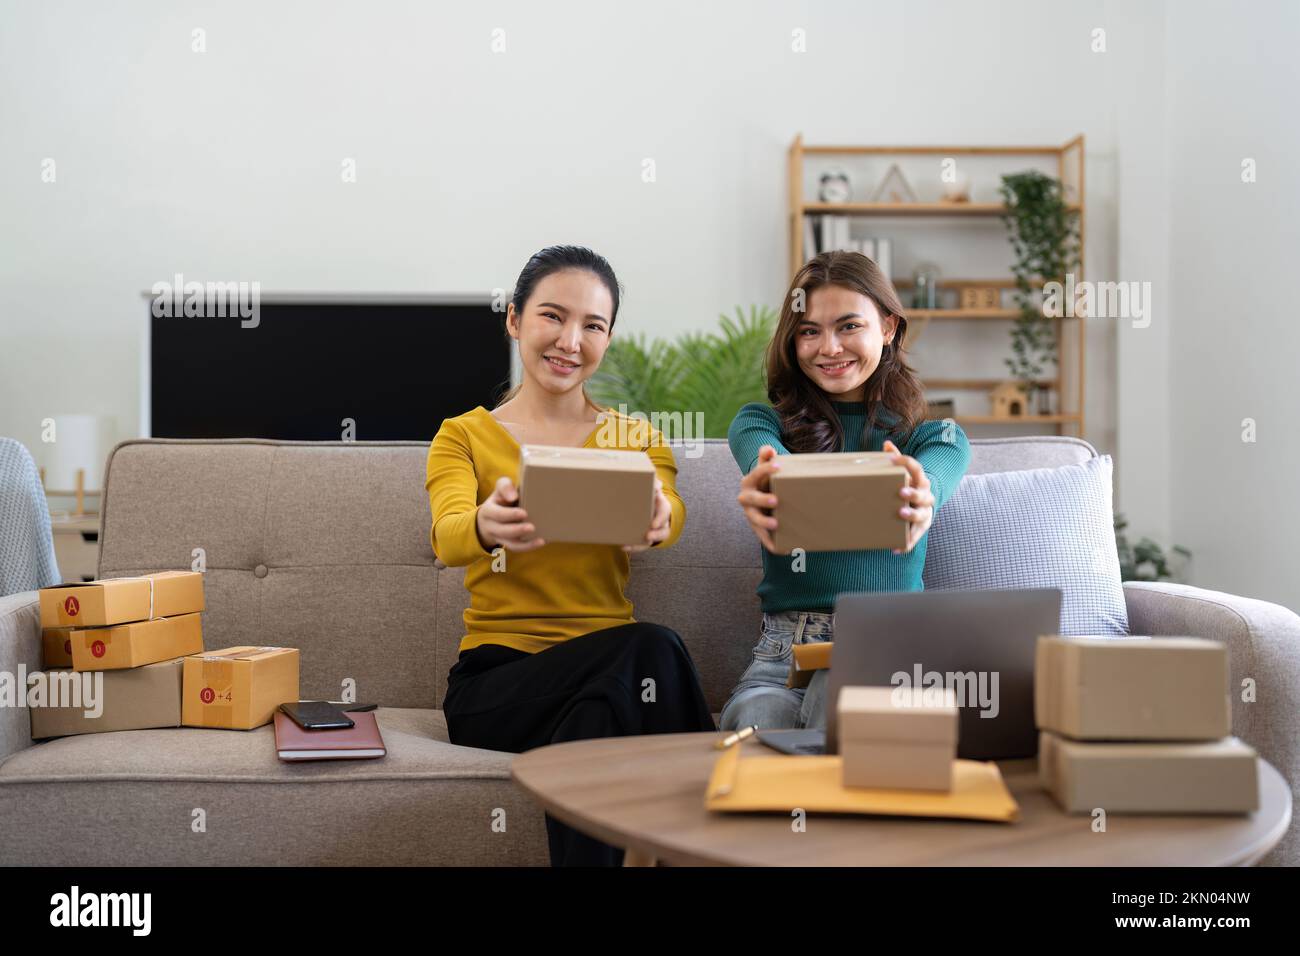 Young business woman working online e-commerce shopping at her shop. Young woman seller prepare parcel box of product for deliver to customer. Online Stock Photo